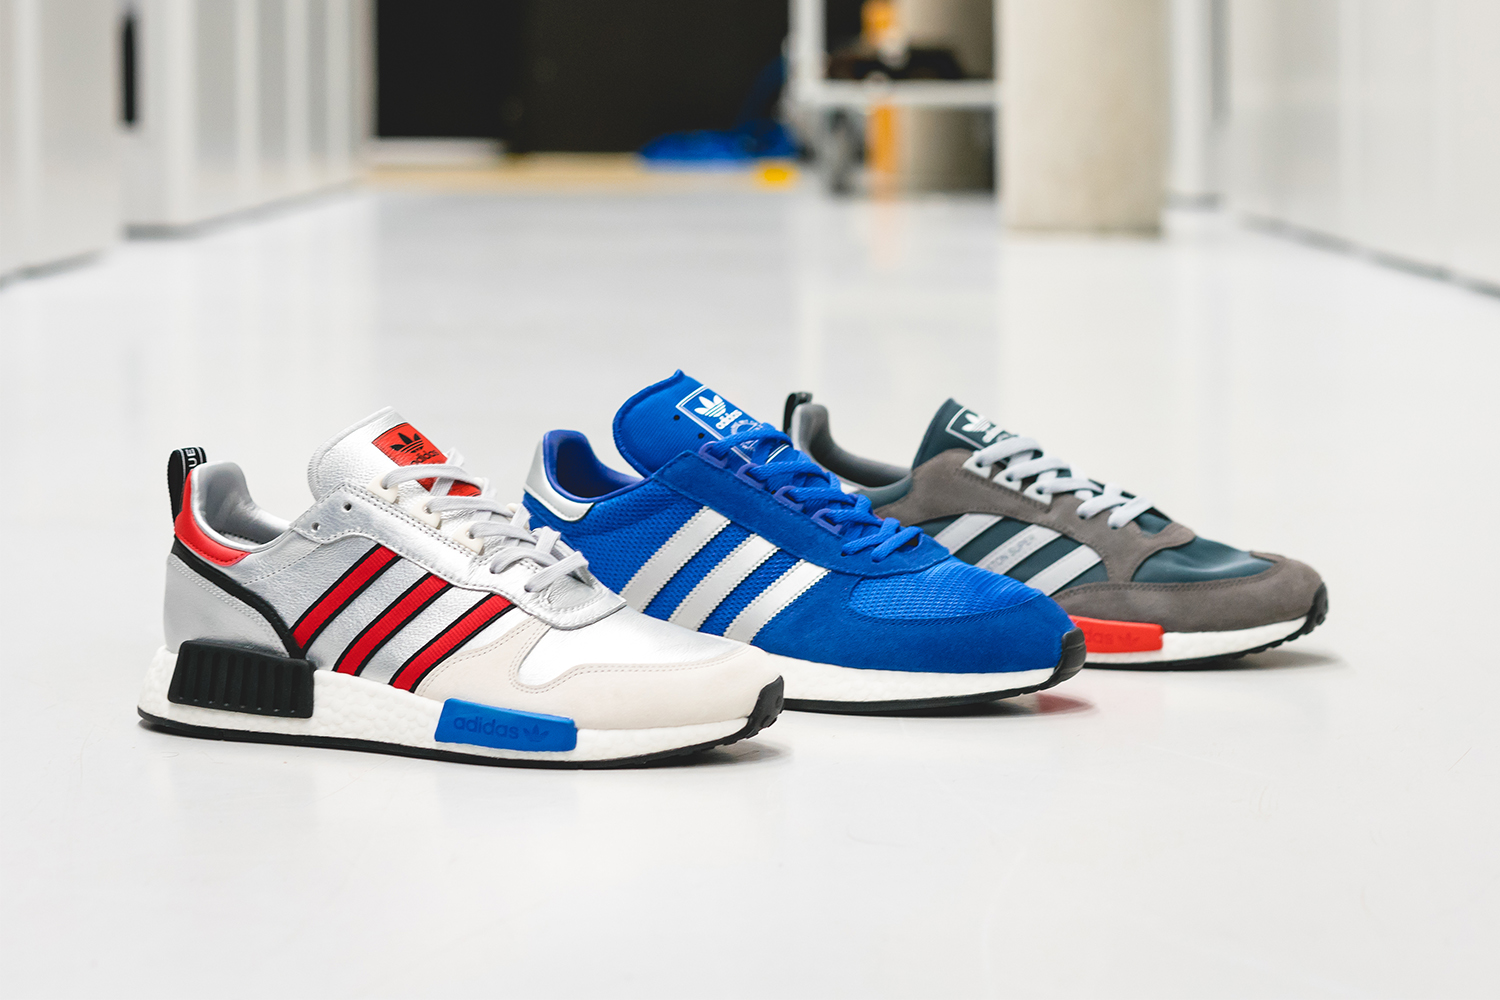 adidas never made pack